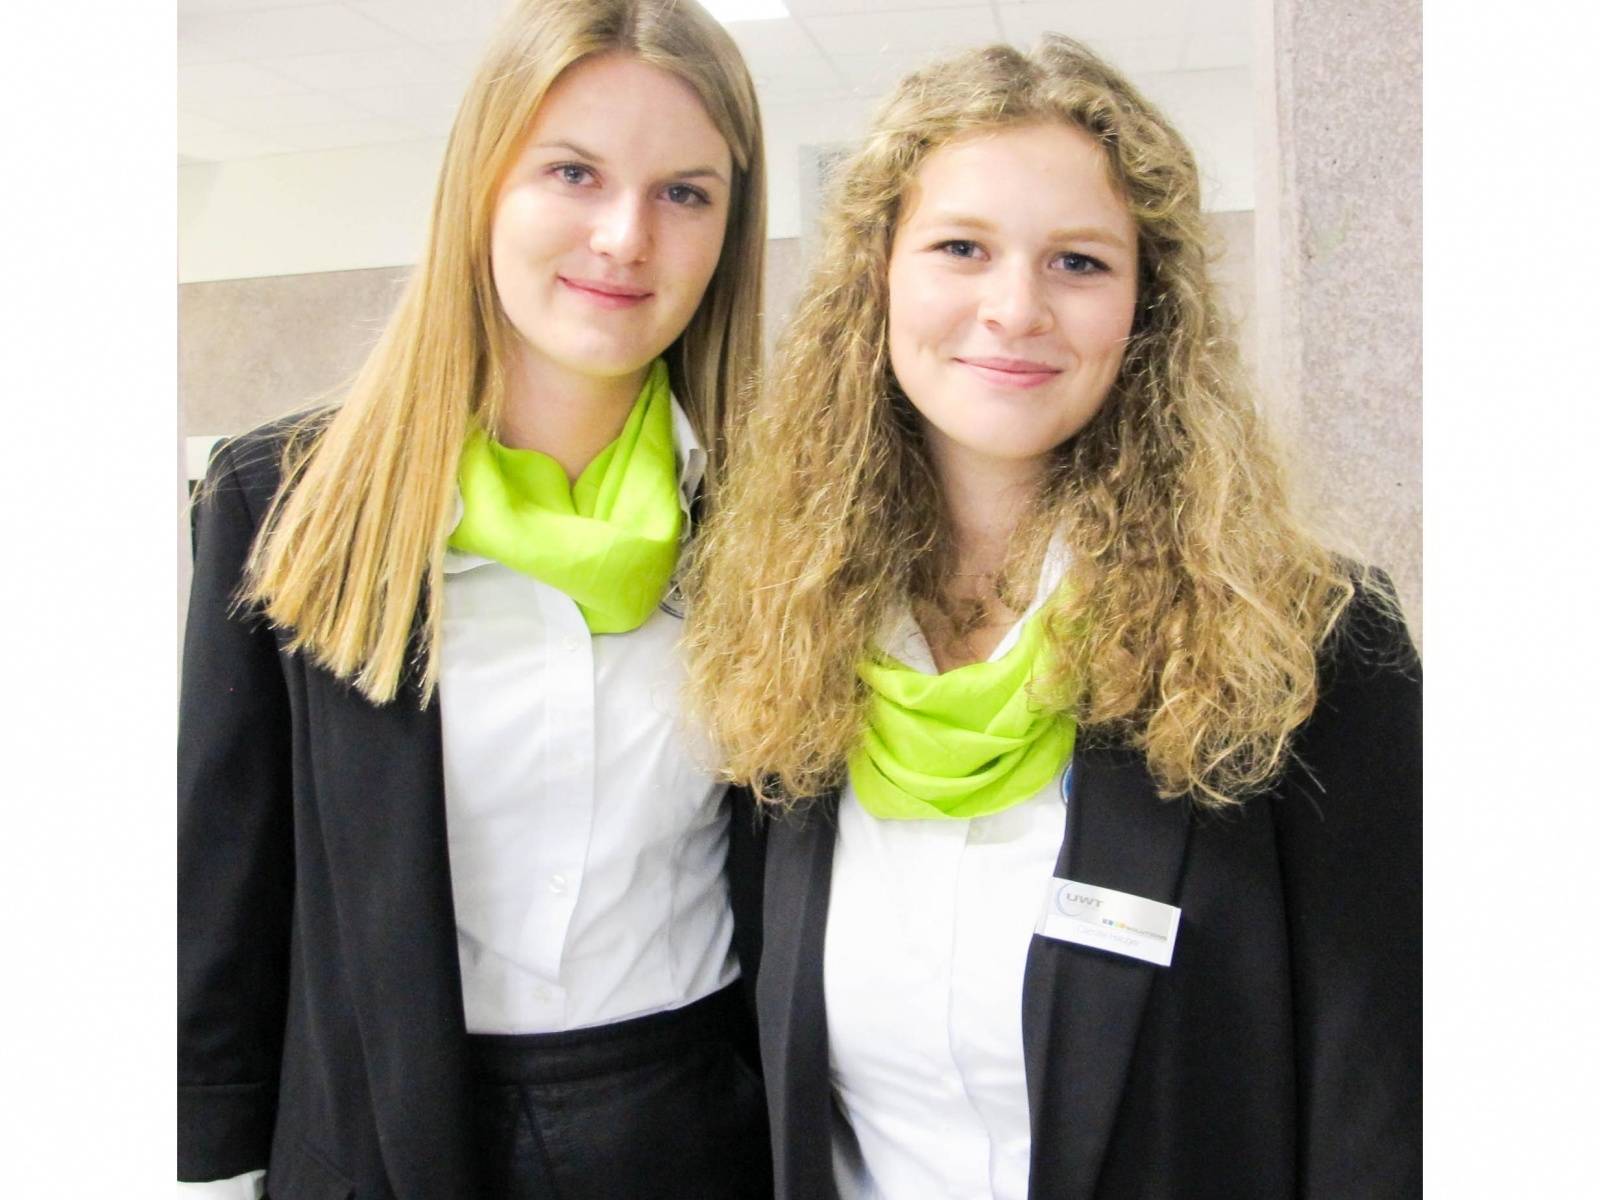 Alina and Camille are part of the export team at UWT